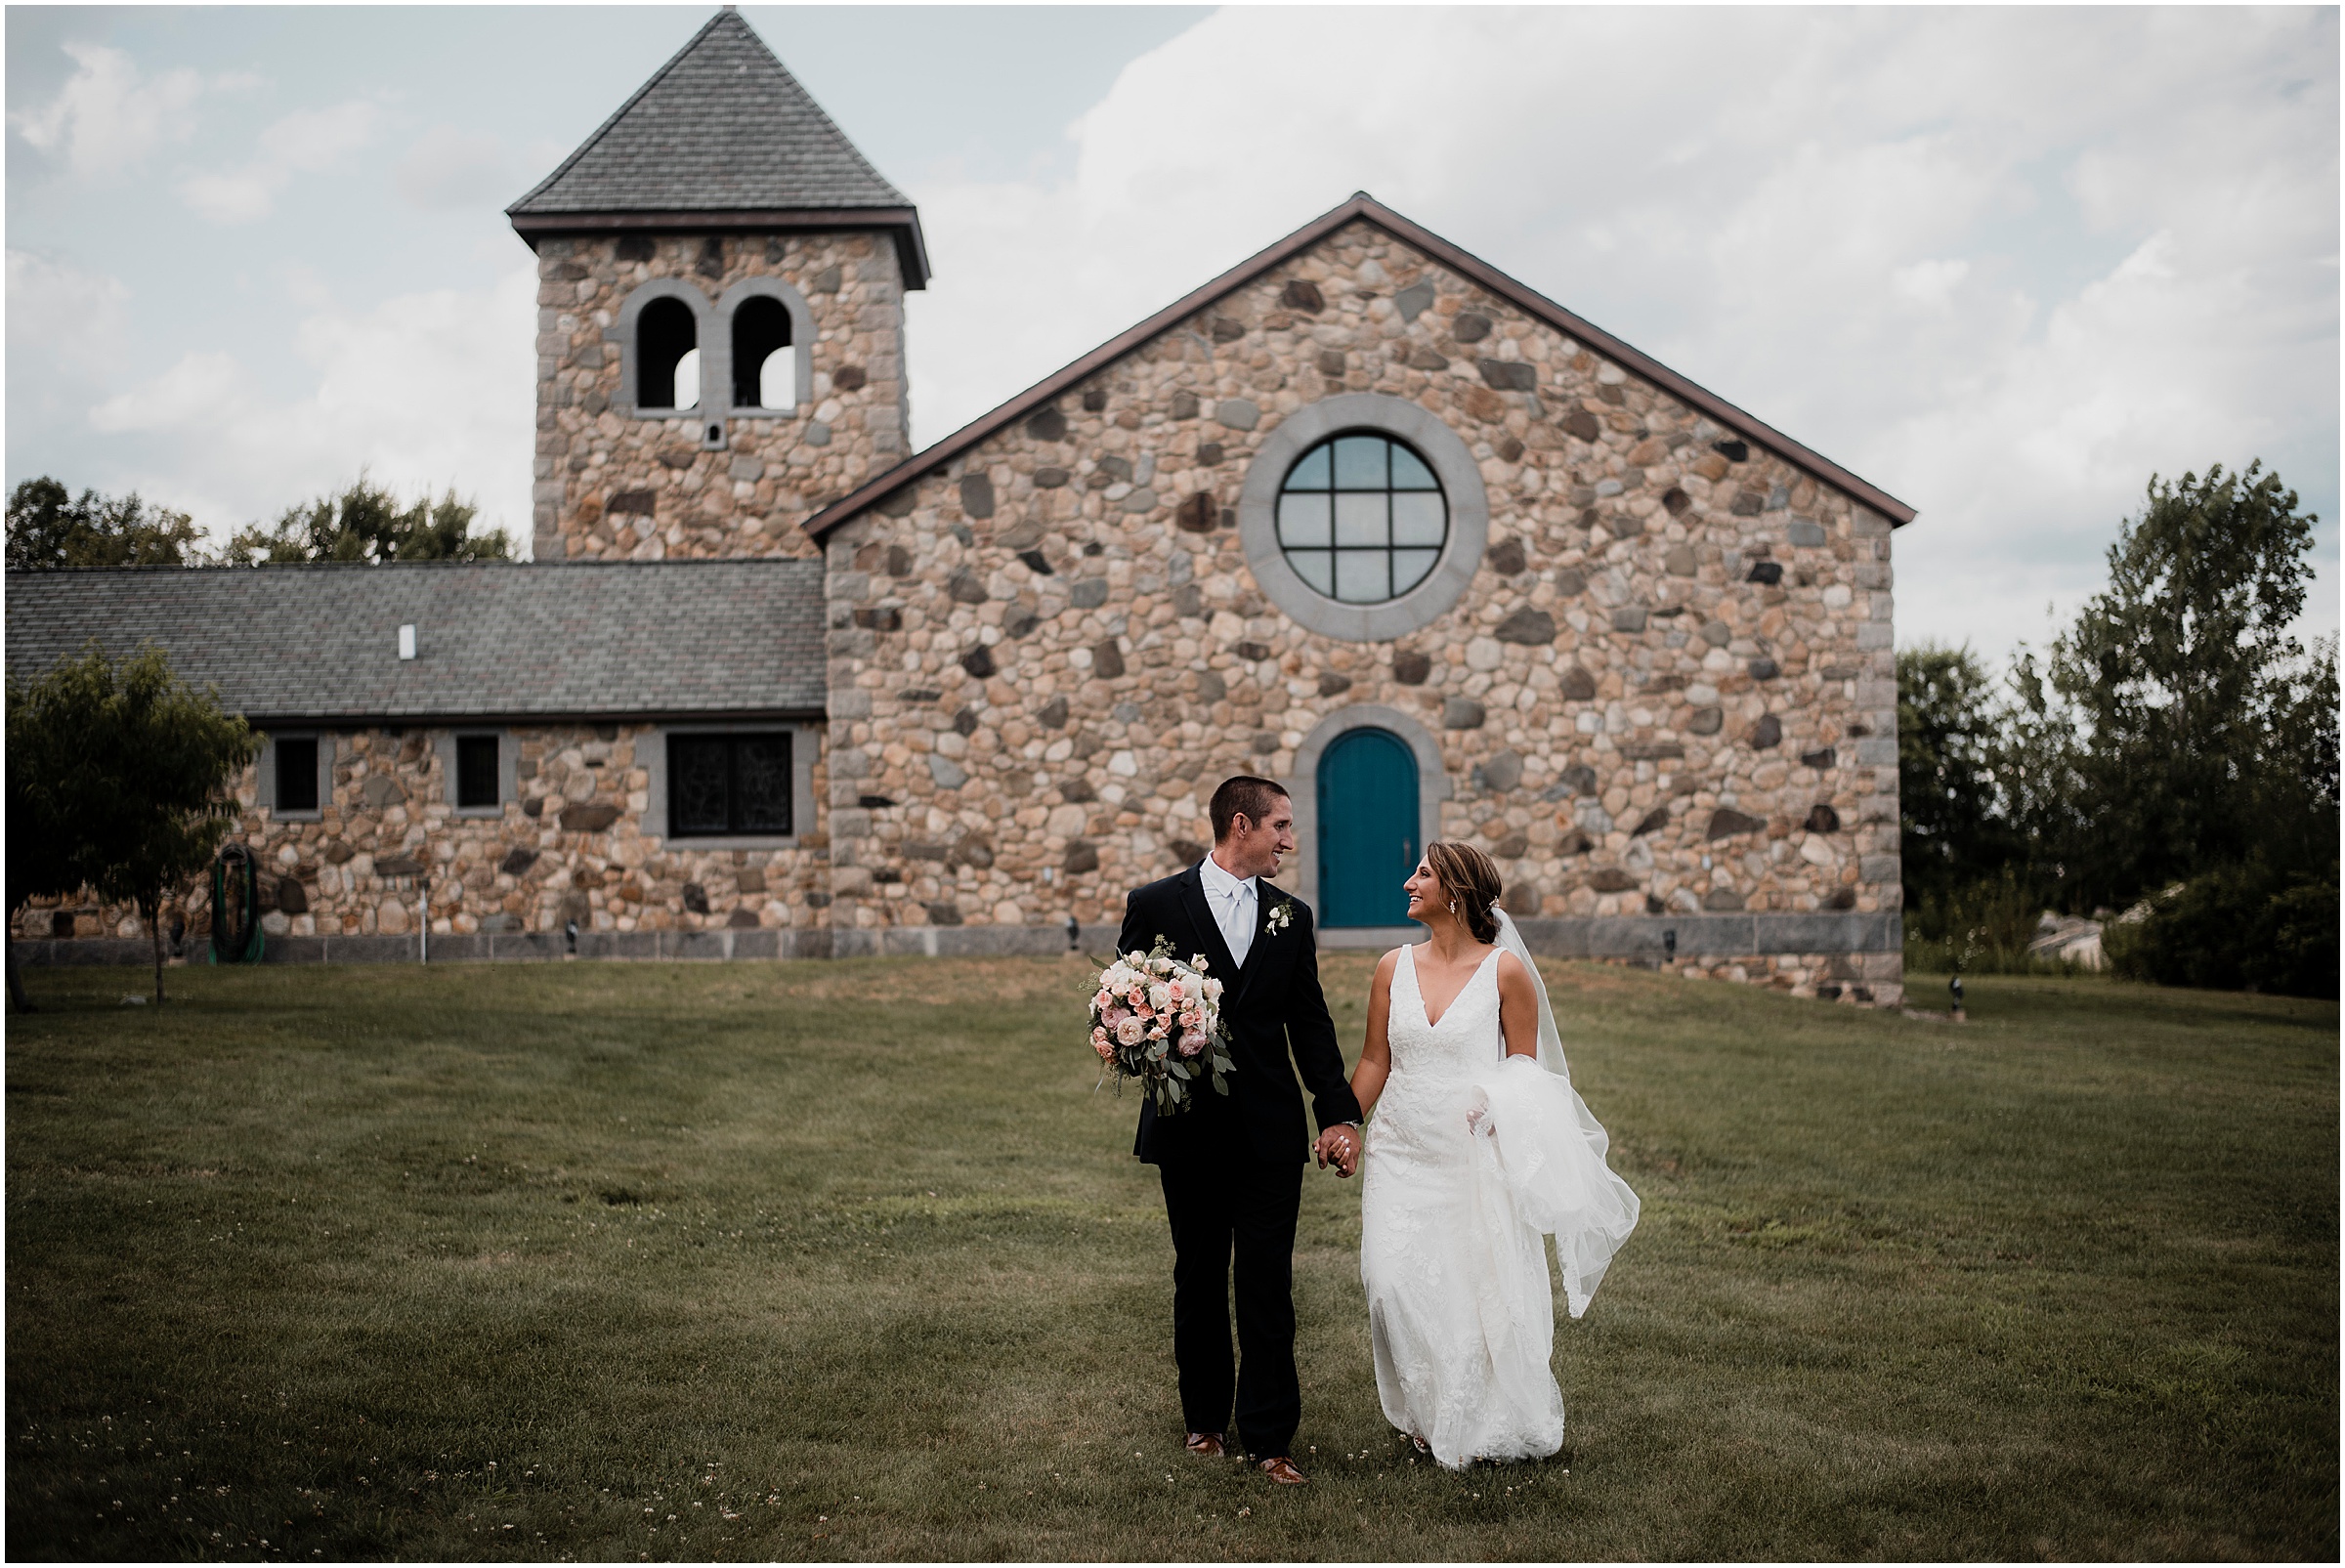 Bride and Groom portraits at The Inn at Mystic by Love, Sunday Photography